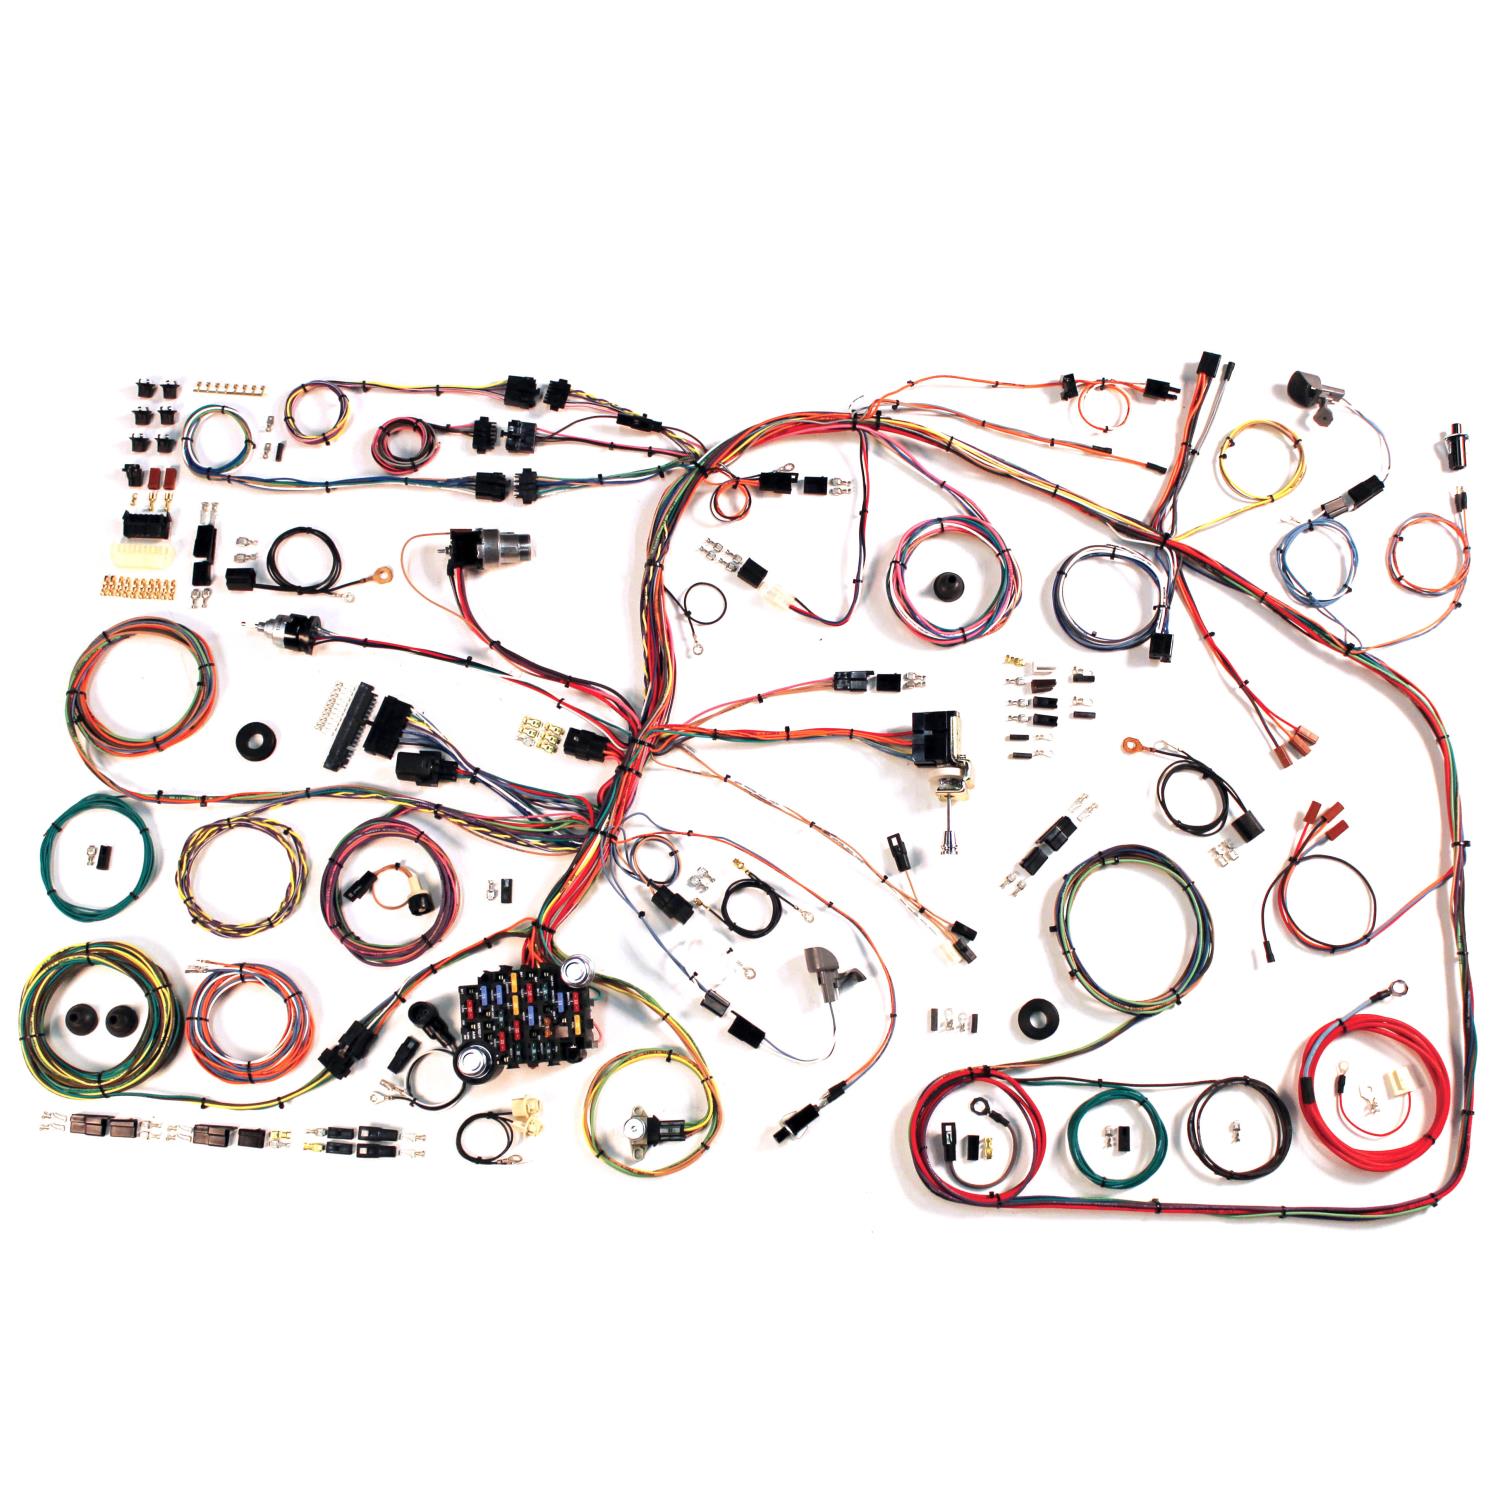 510368 Classic Update Wiring Kit 1967-1972 Ford Truck